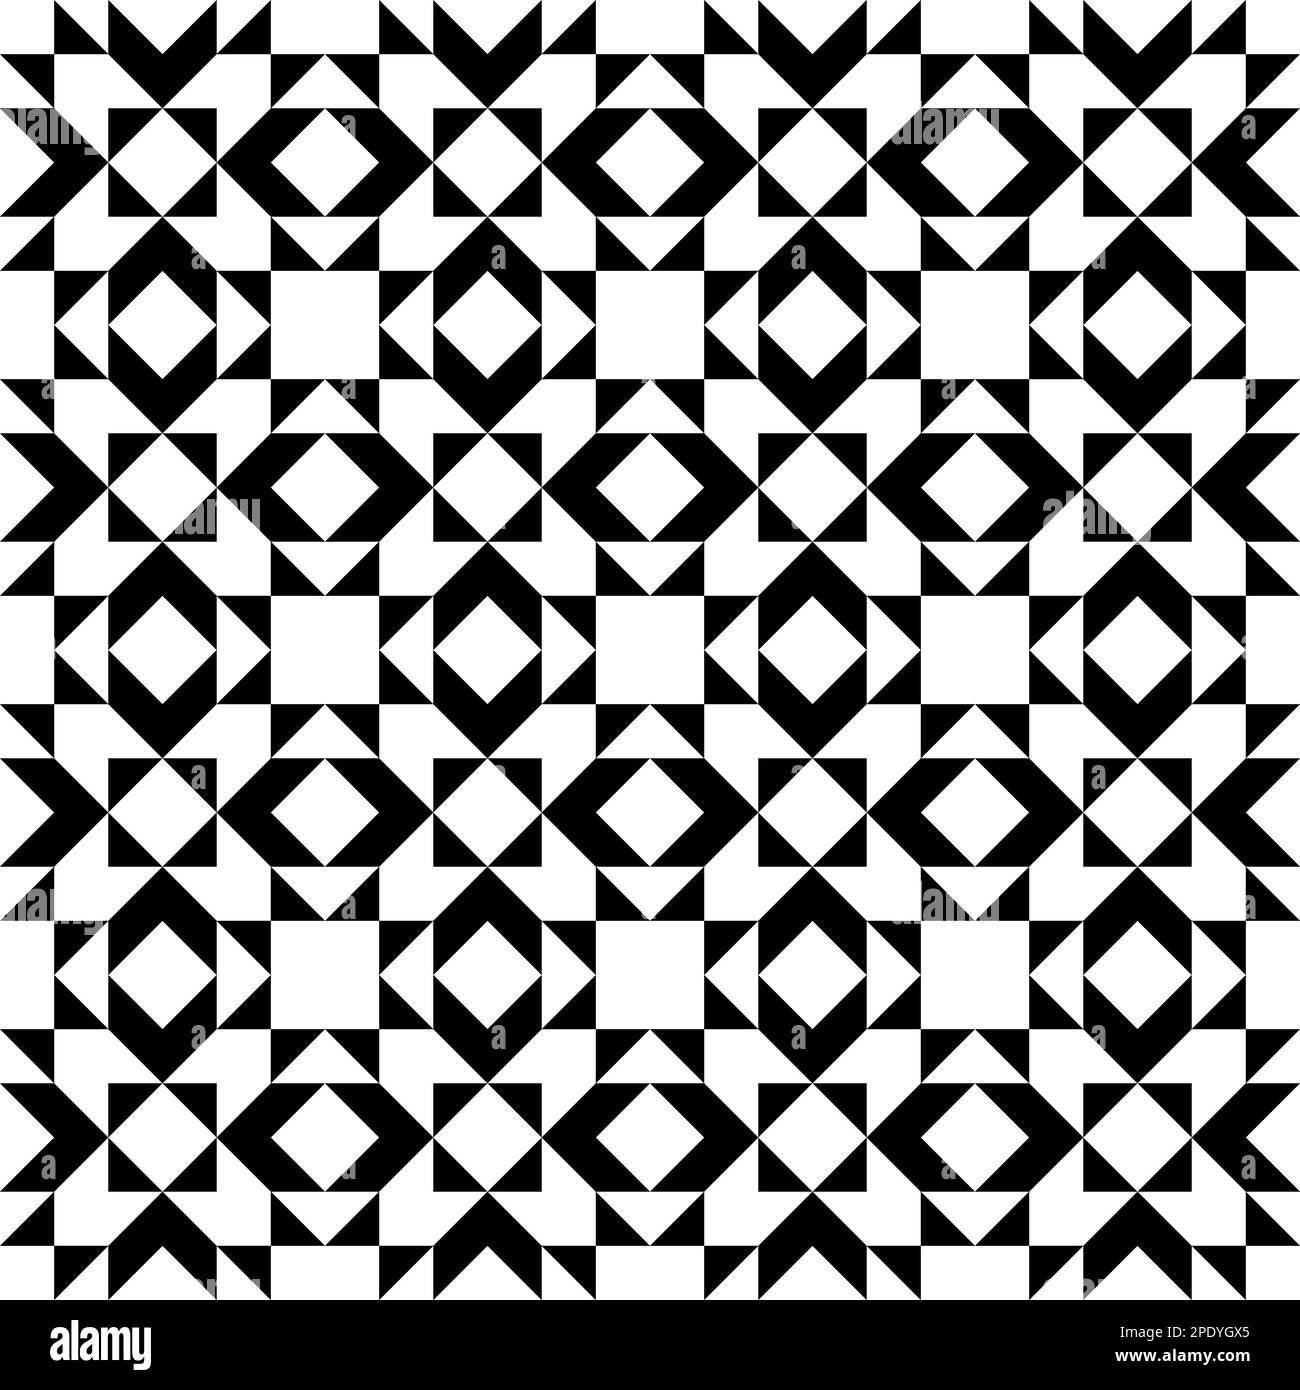 Black and white abstract geometric quilt pattern. High contrast geometric background with triangles. Simple colors - easy to recolor. Minimal backgrou Stock Vector